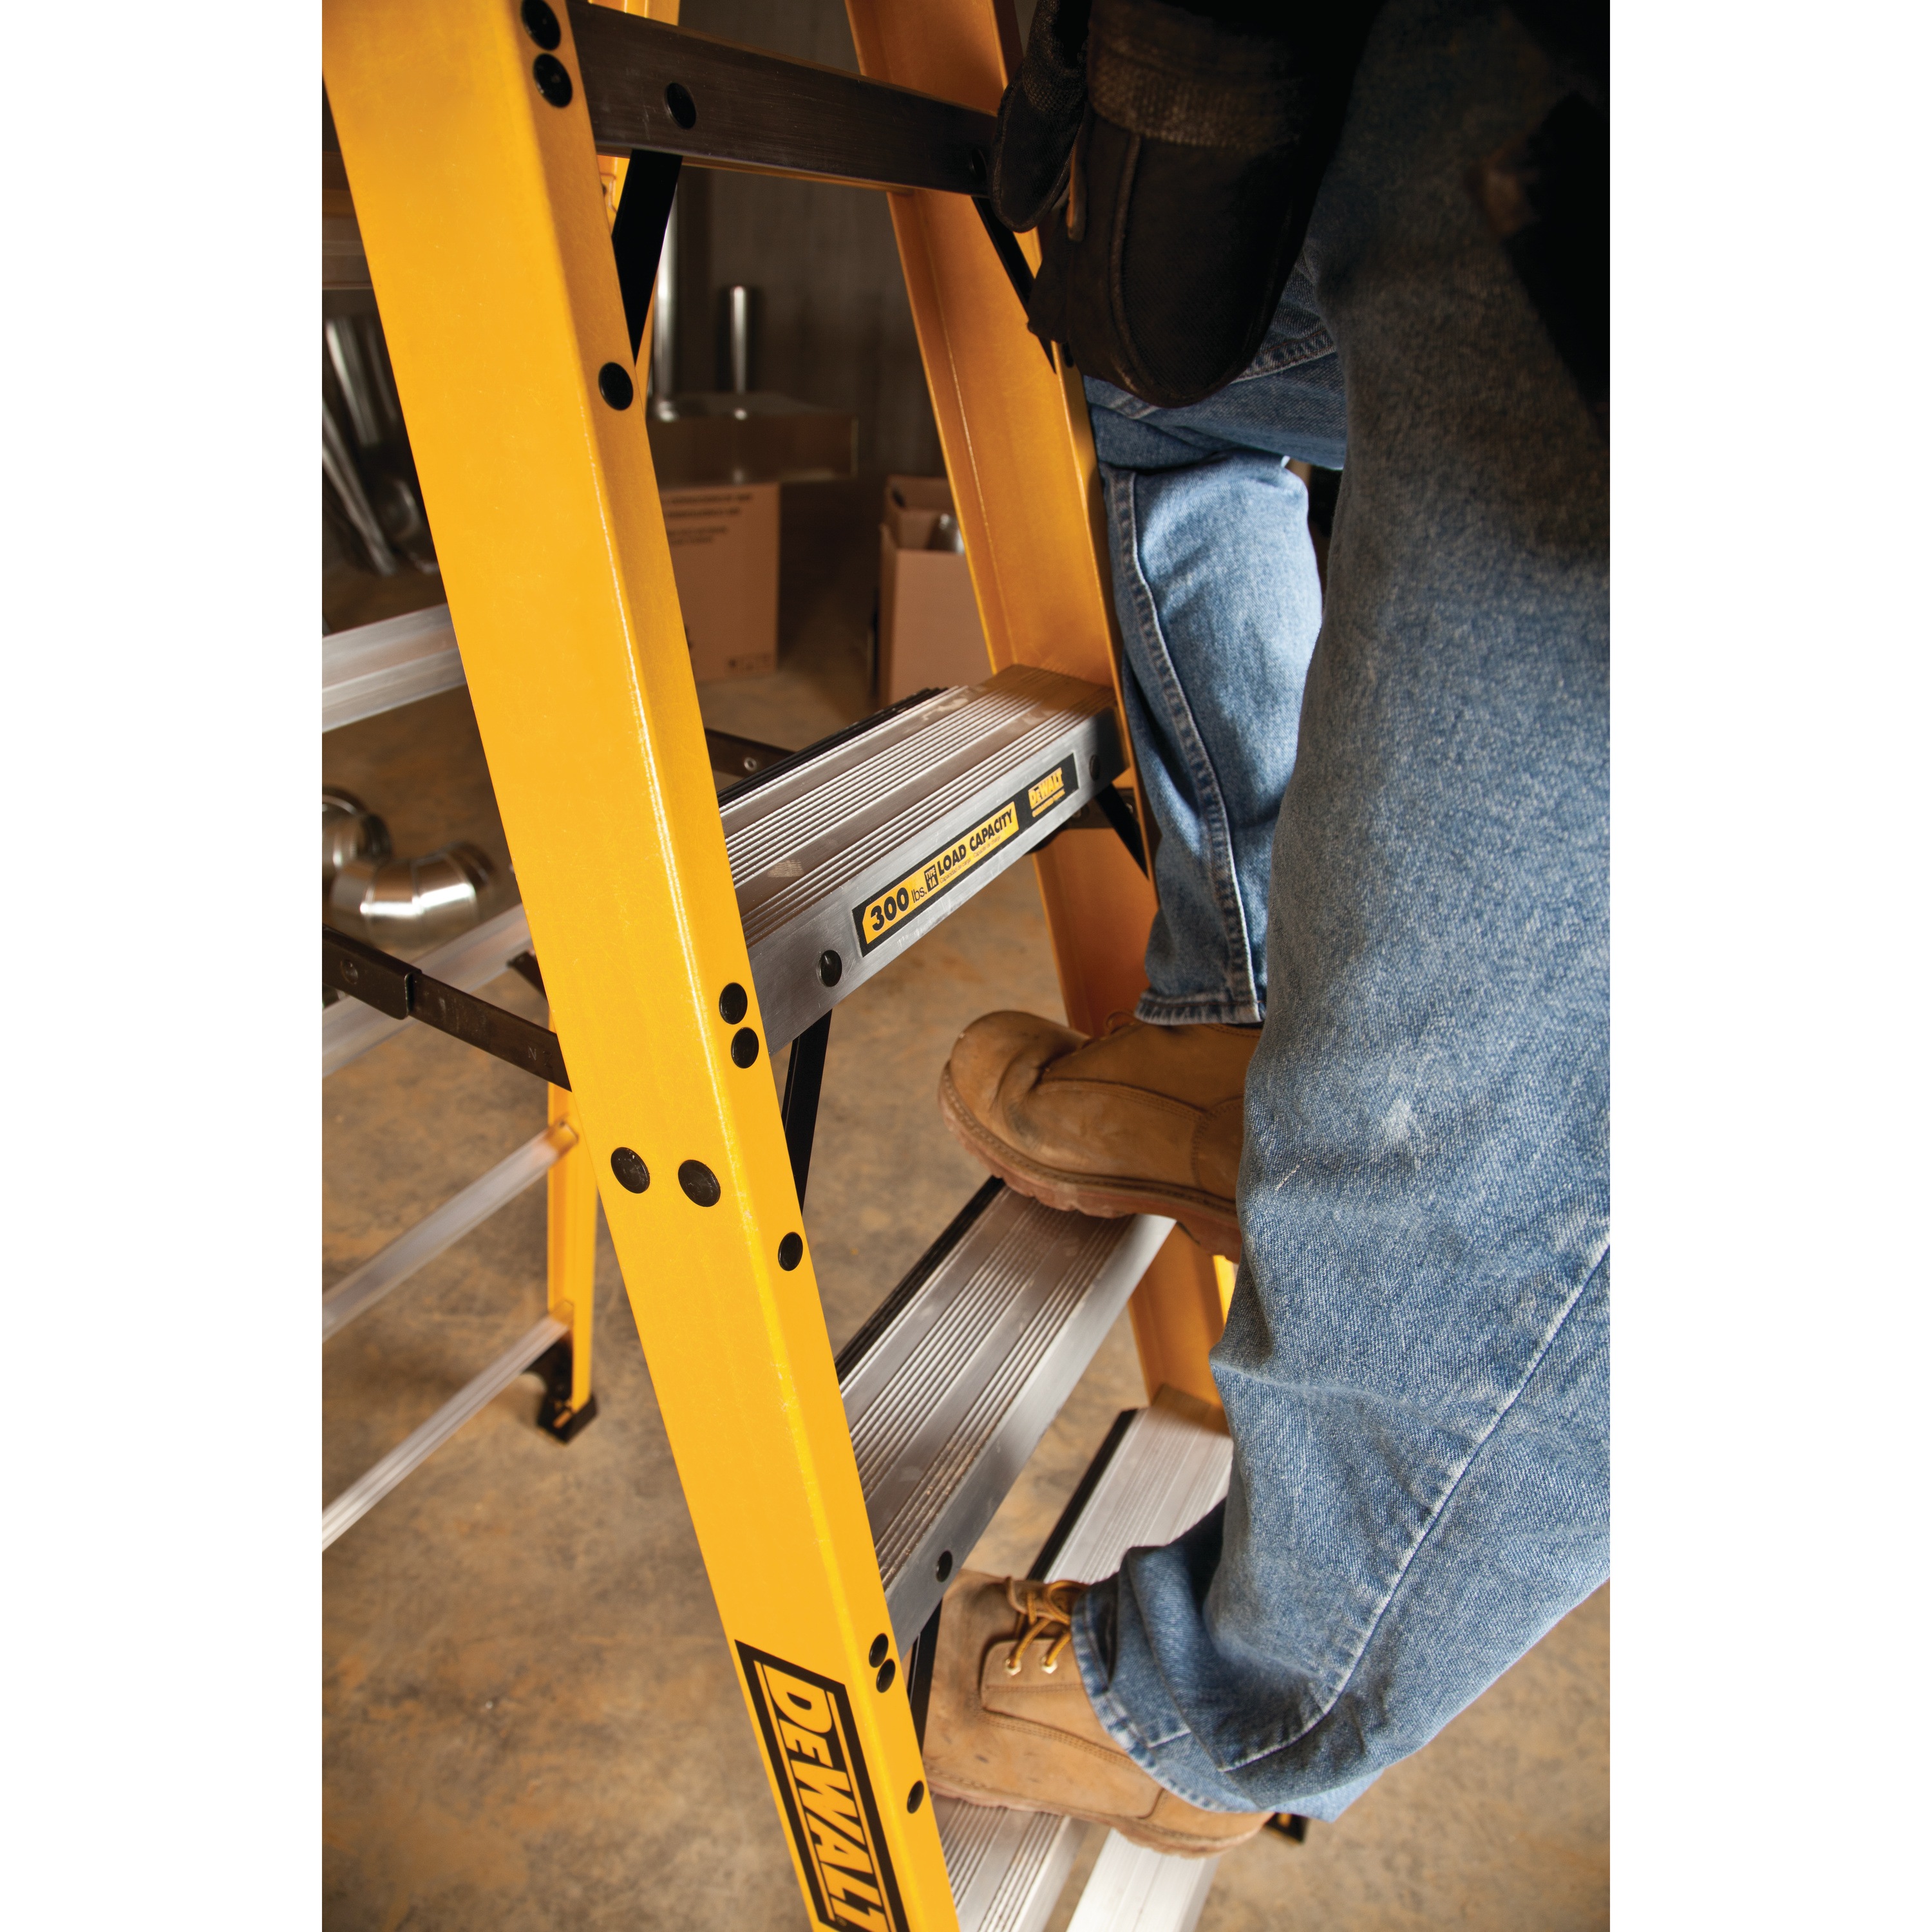 Greater step surface feature of 12 foot Fiberglass Step Ladder 300 pound Load Capacity.